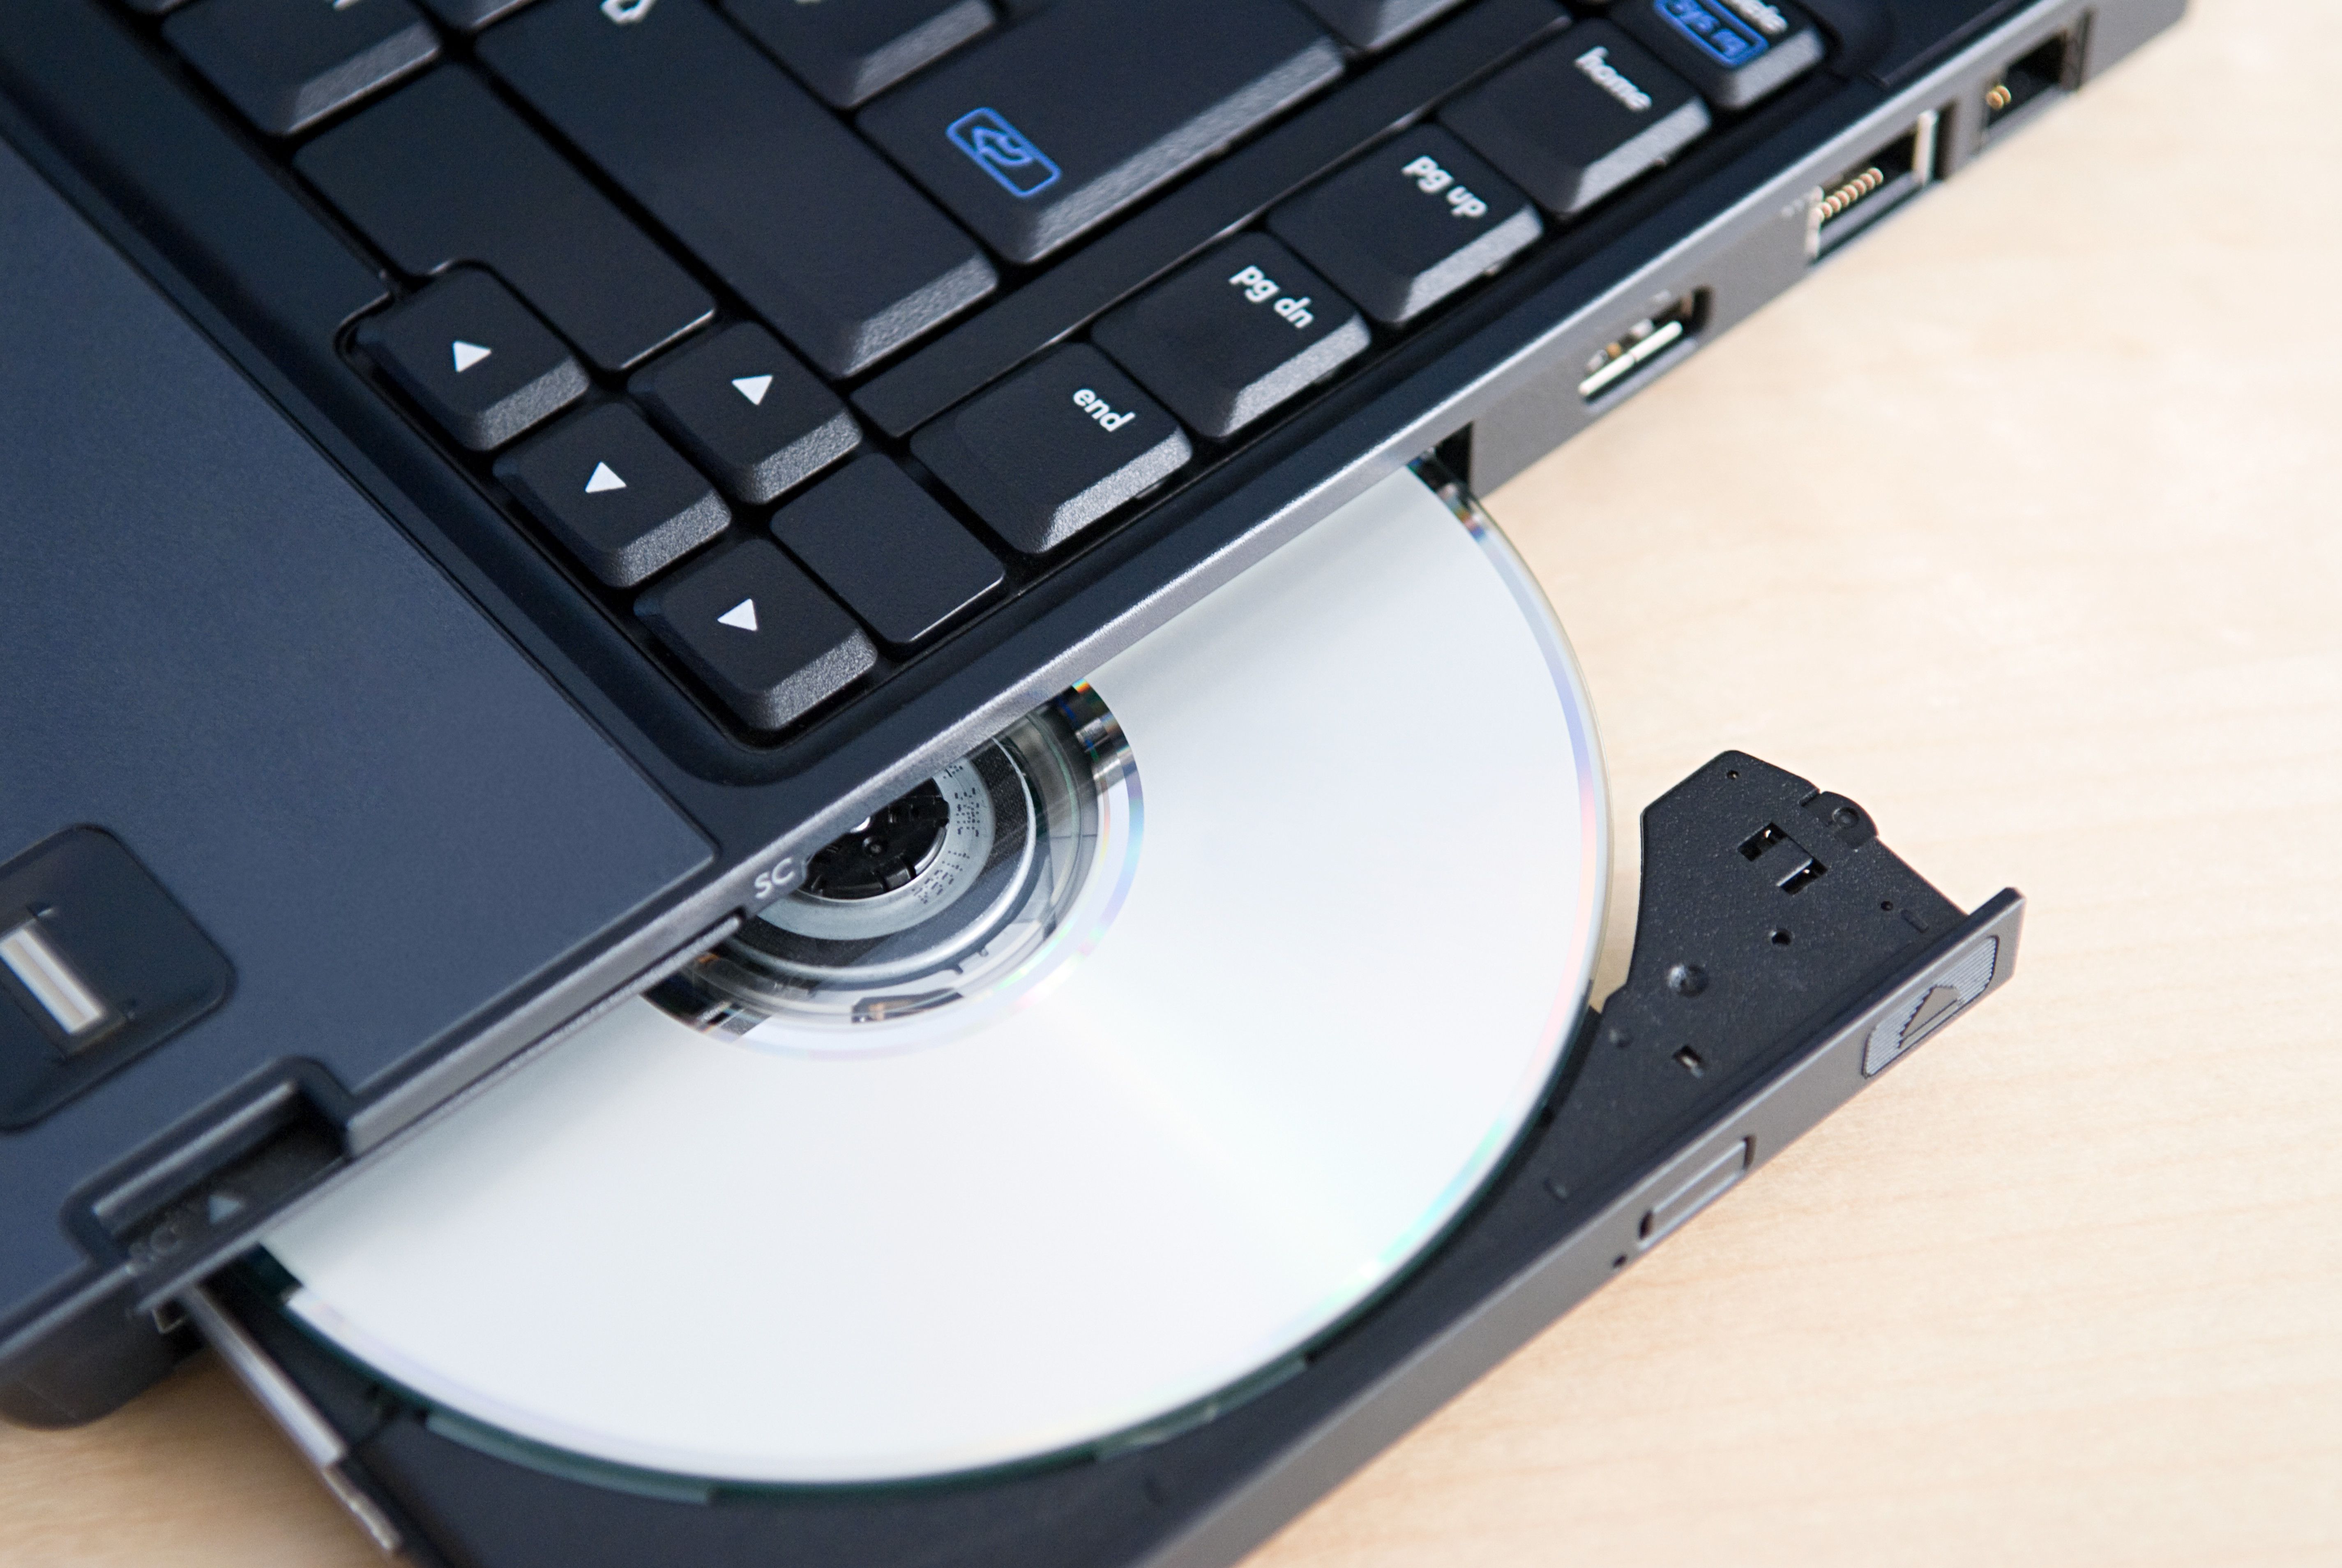 How To Open Cd Drive On Dell Desktop